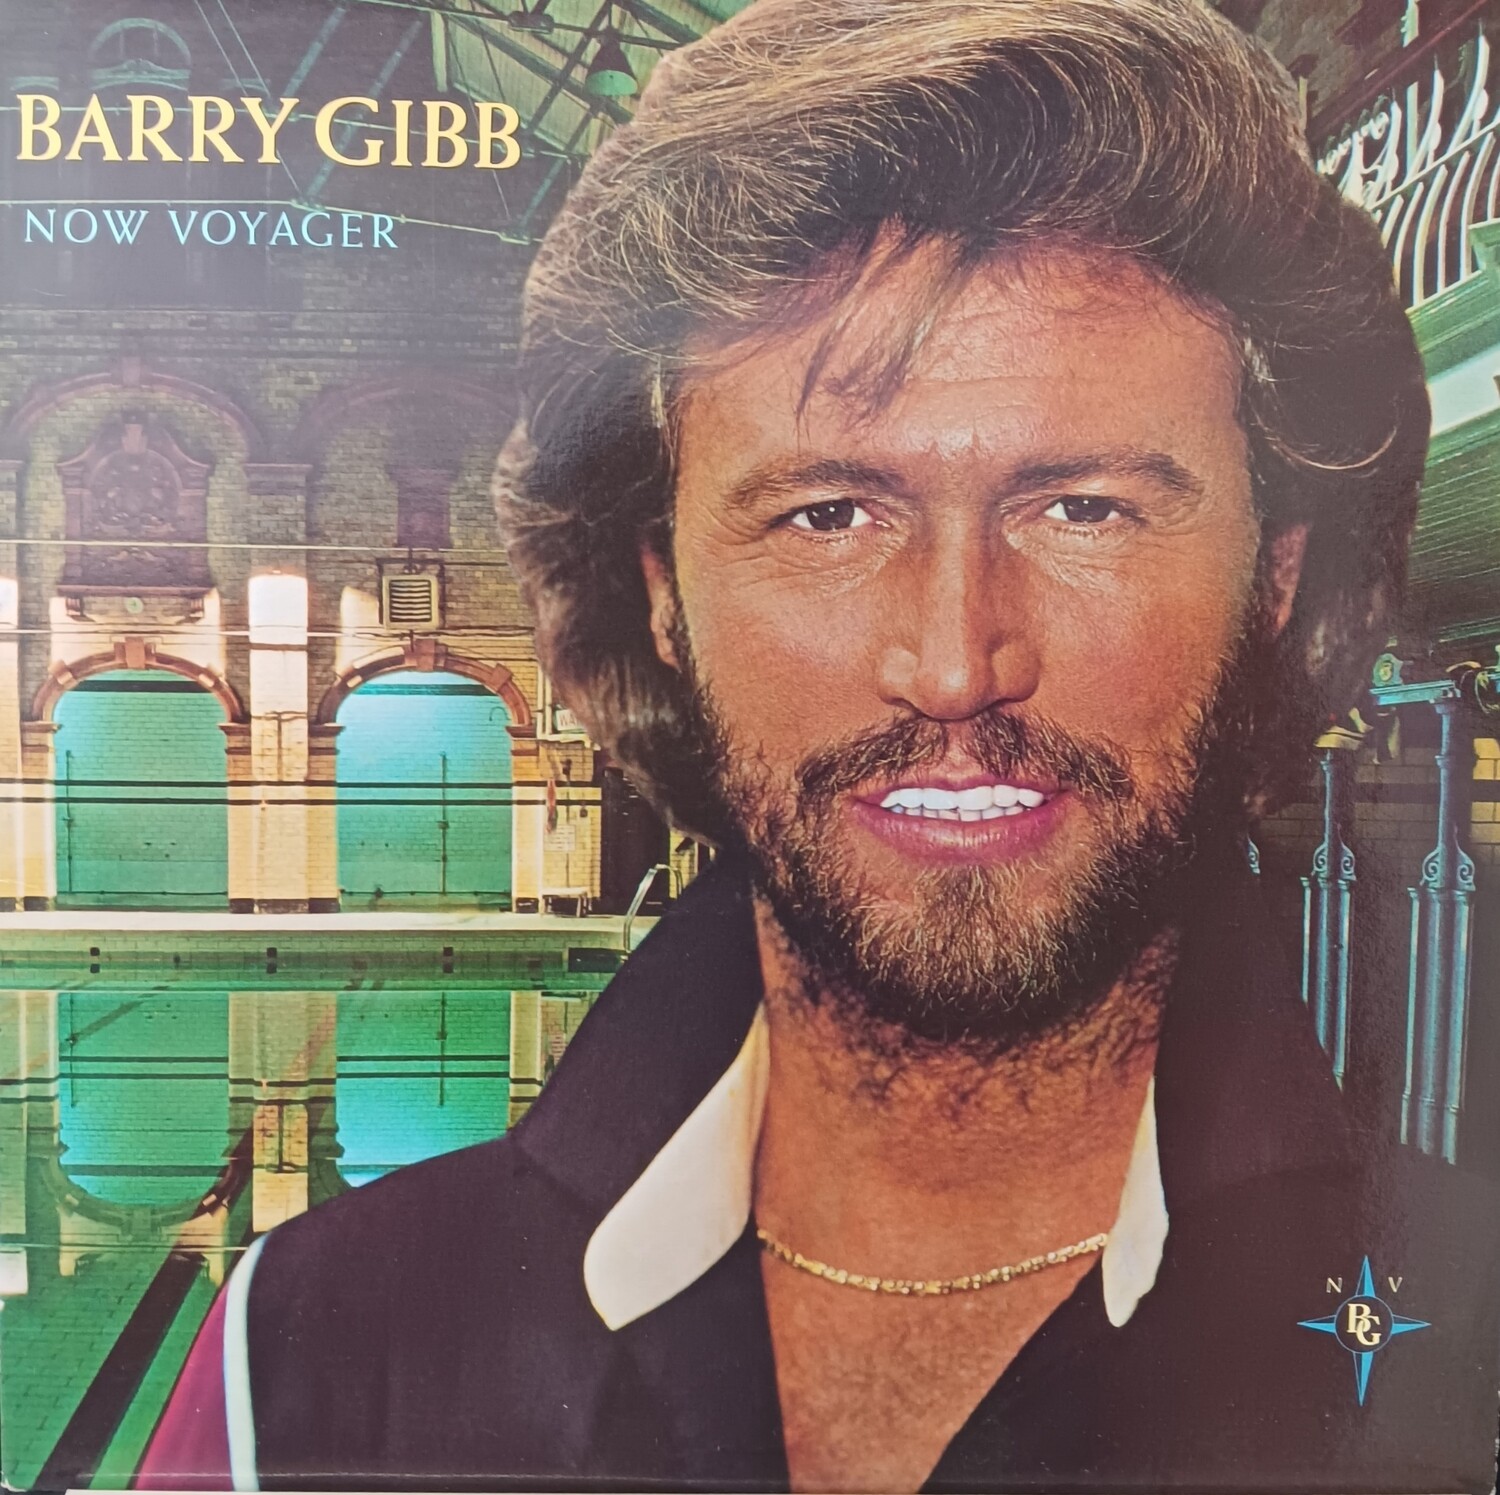 BARRY GIBB - Now voyager